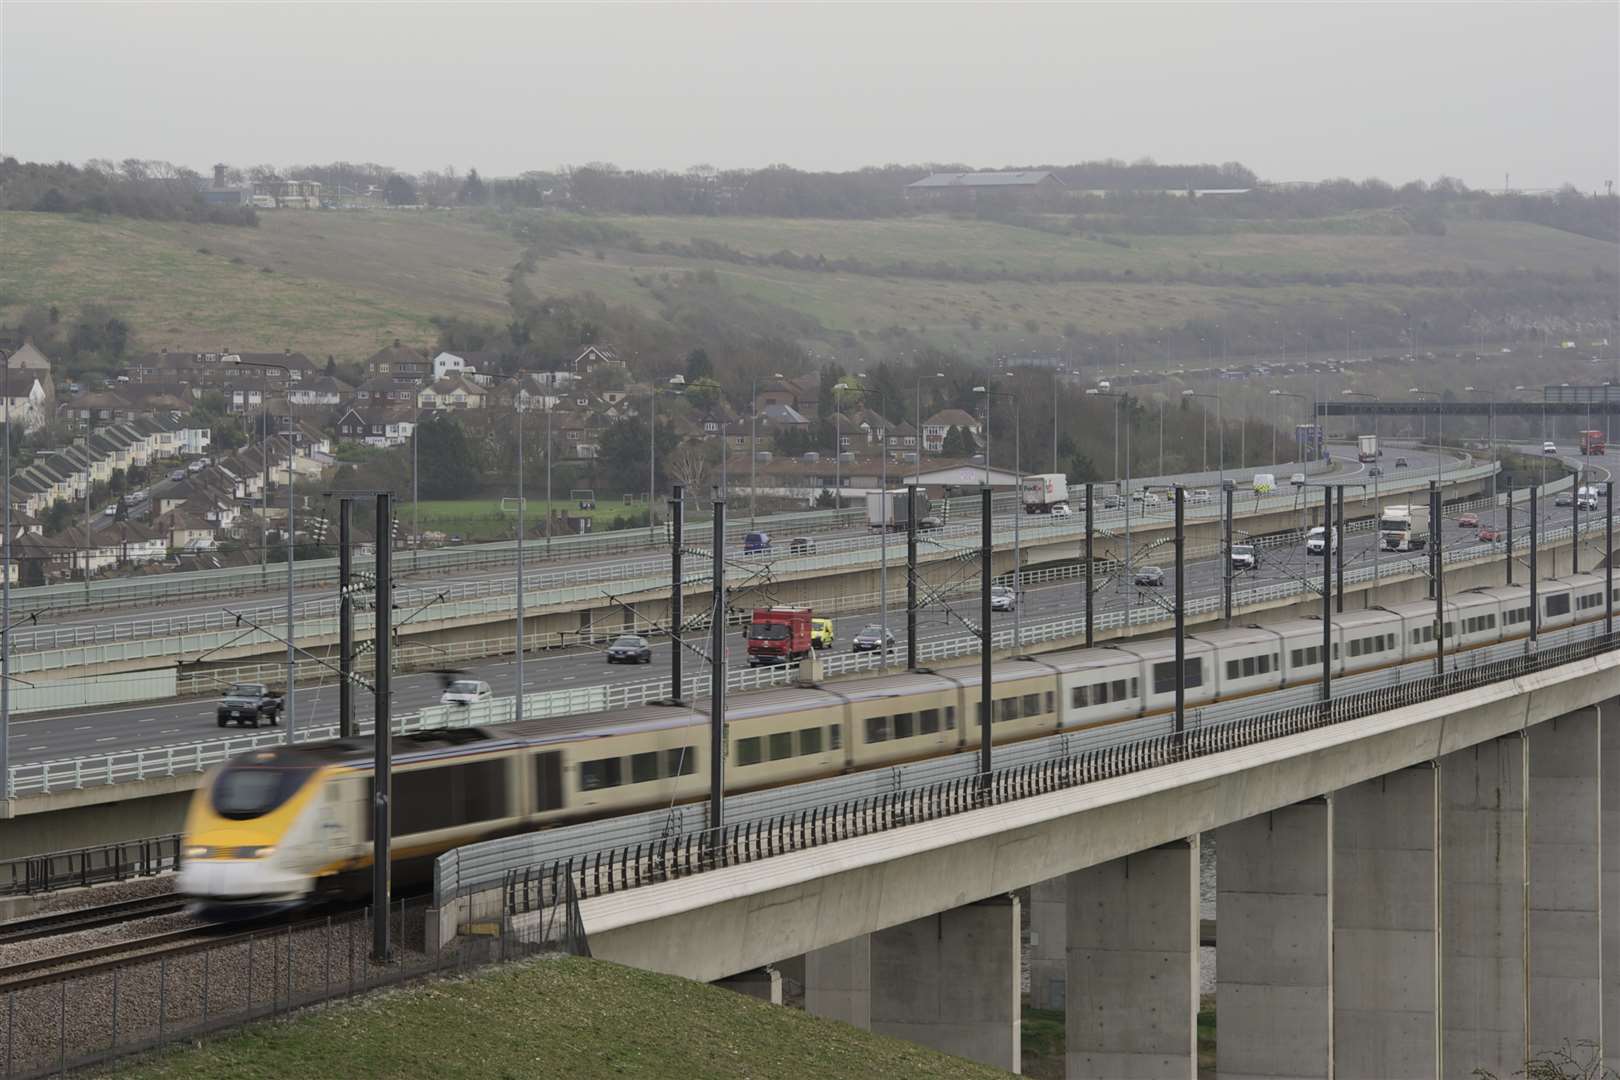 A Eurostar train crosses the Medway Valley bridge at Strood